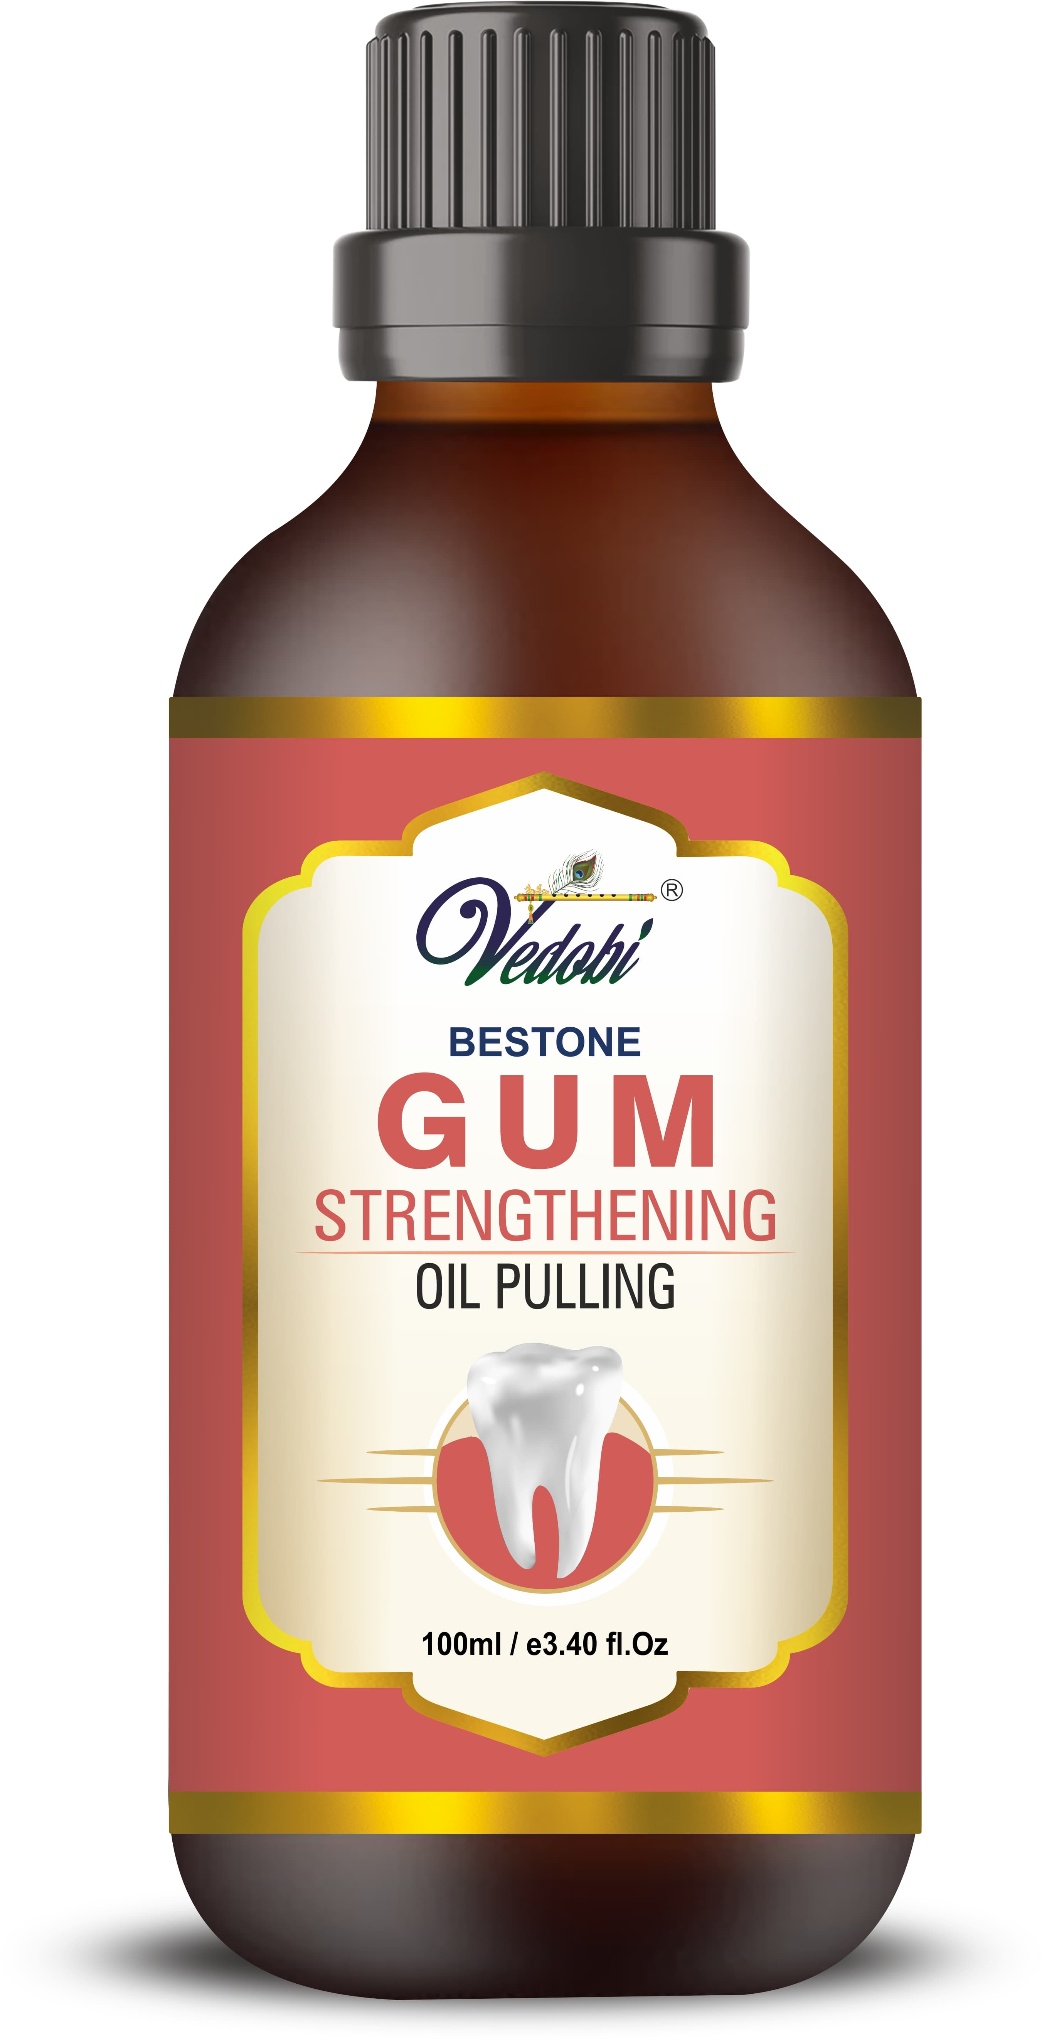 Get the best Benefits of Oil Pulling for Optimal Oral Care Solutions